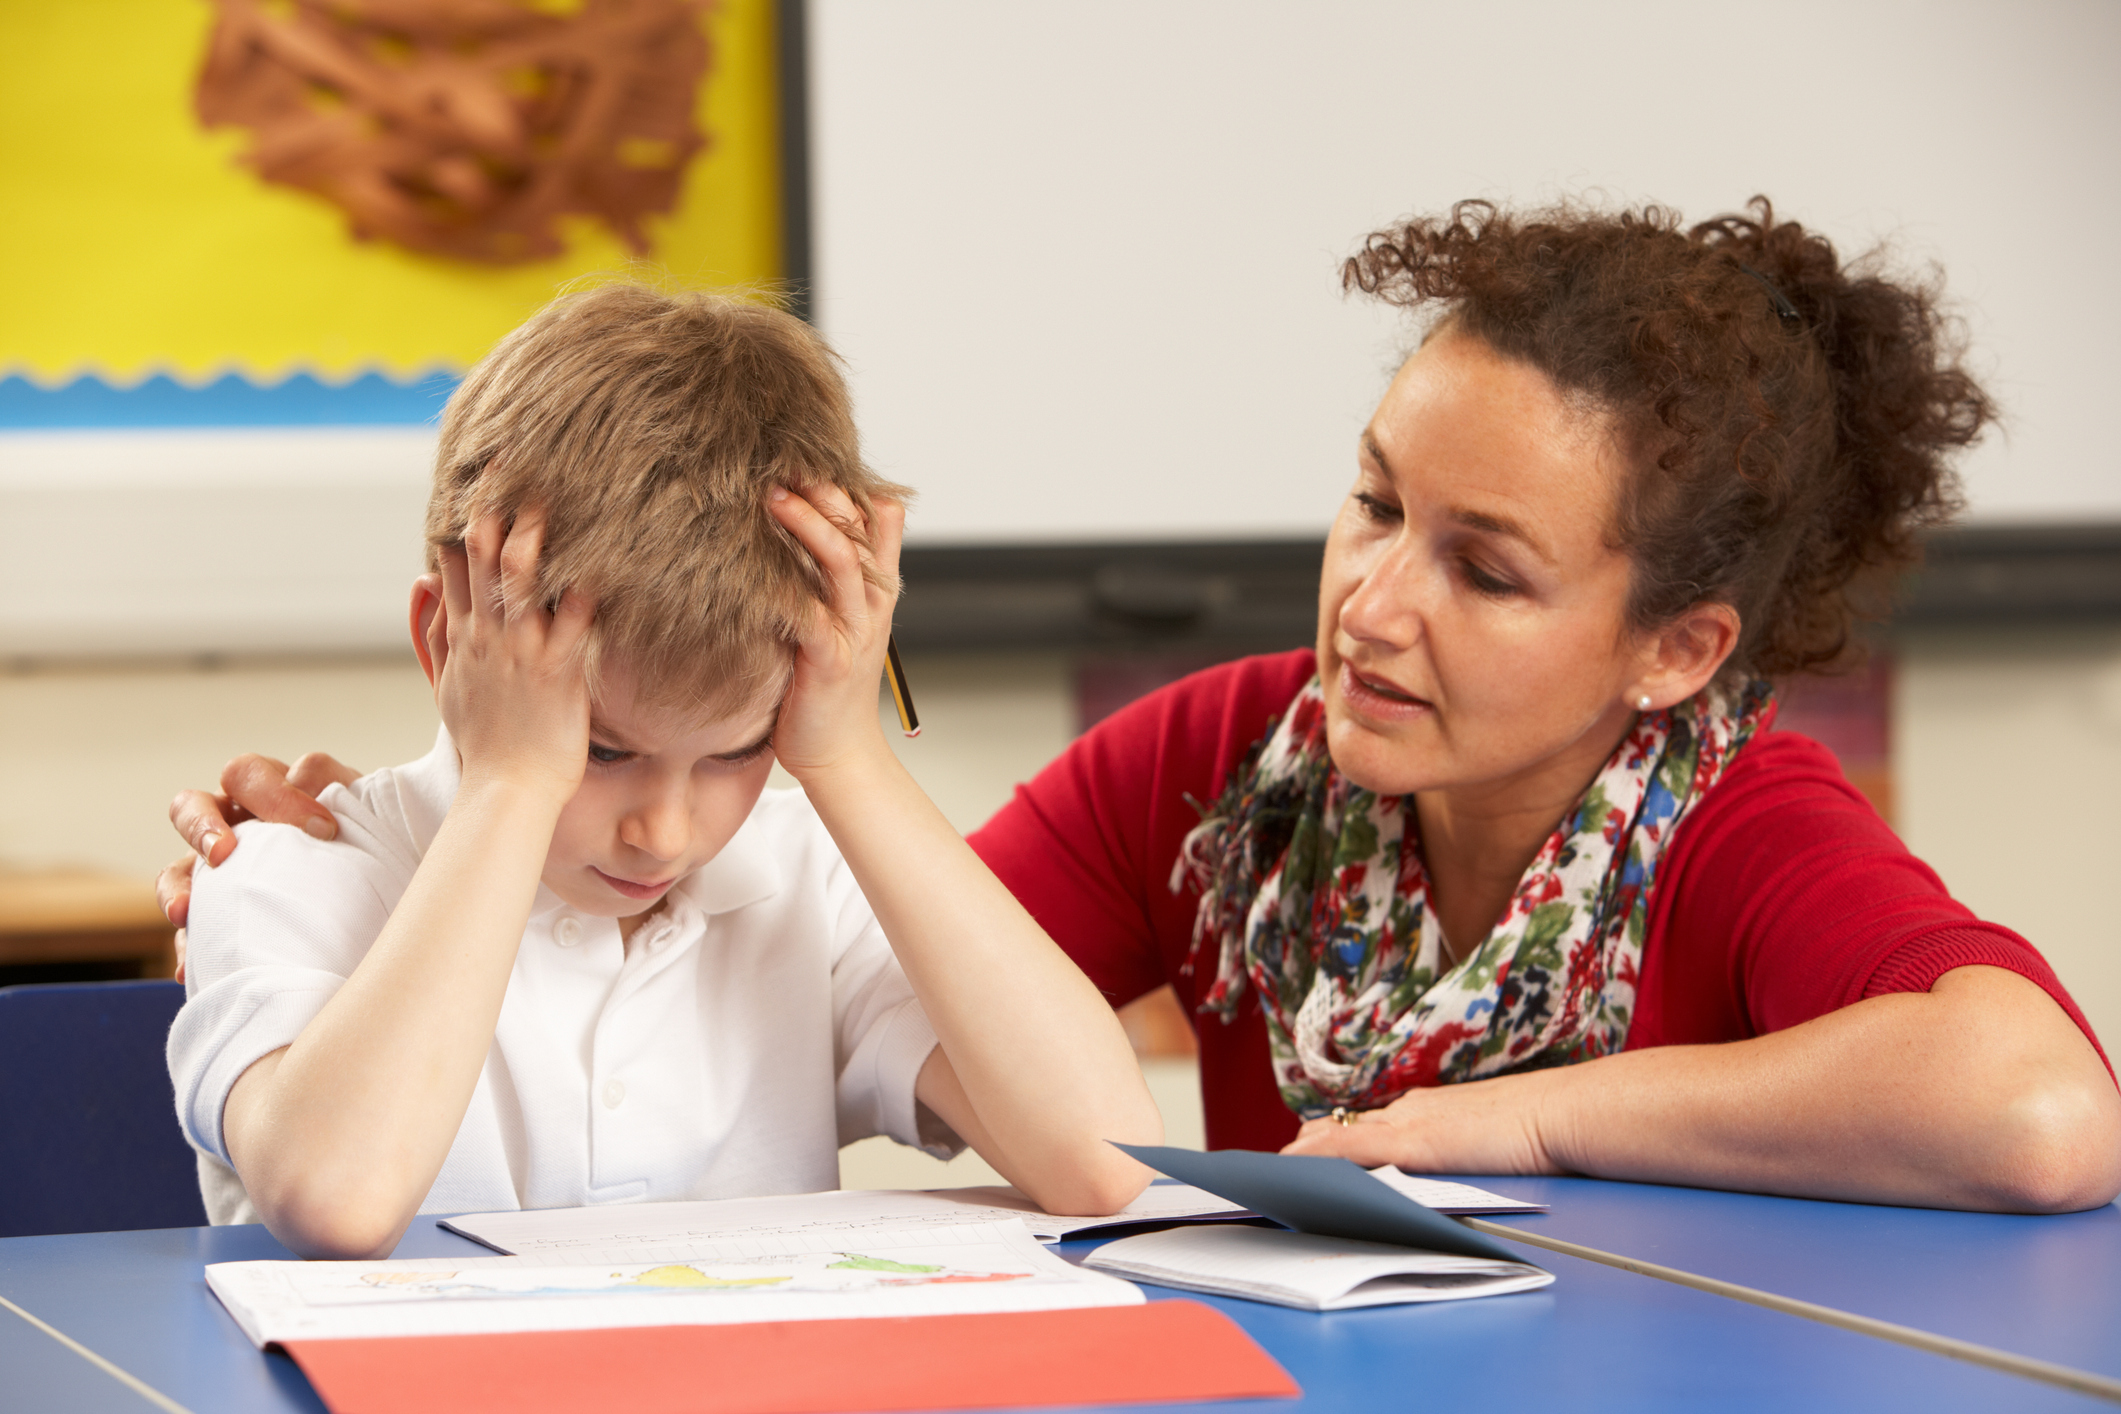 Stressed ADHD Schoolboy Studying In Classroom With Teacher